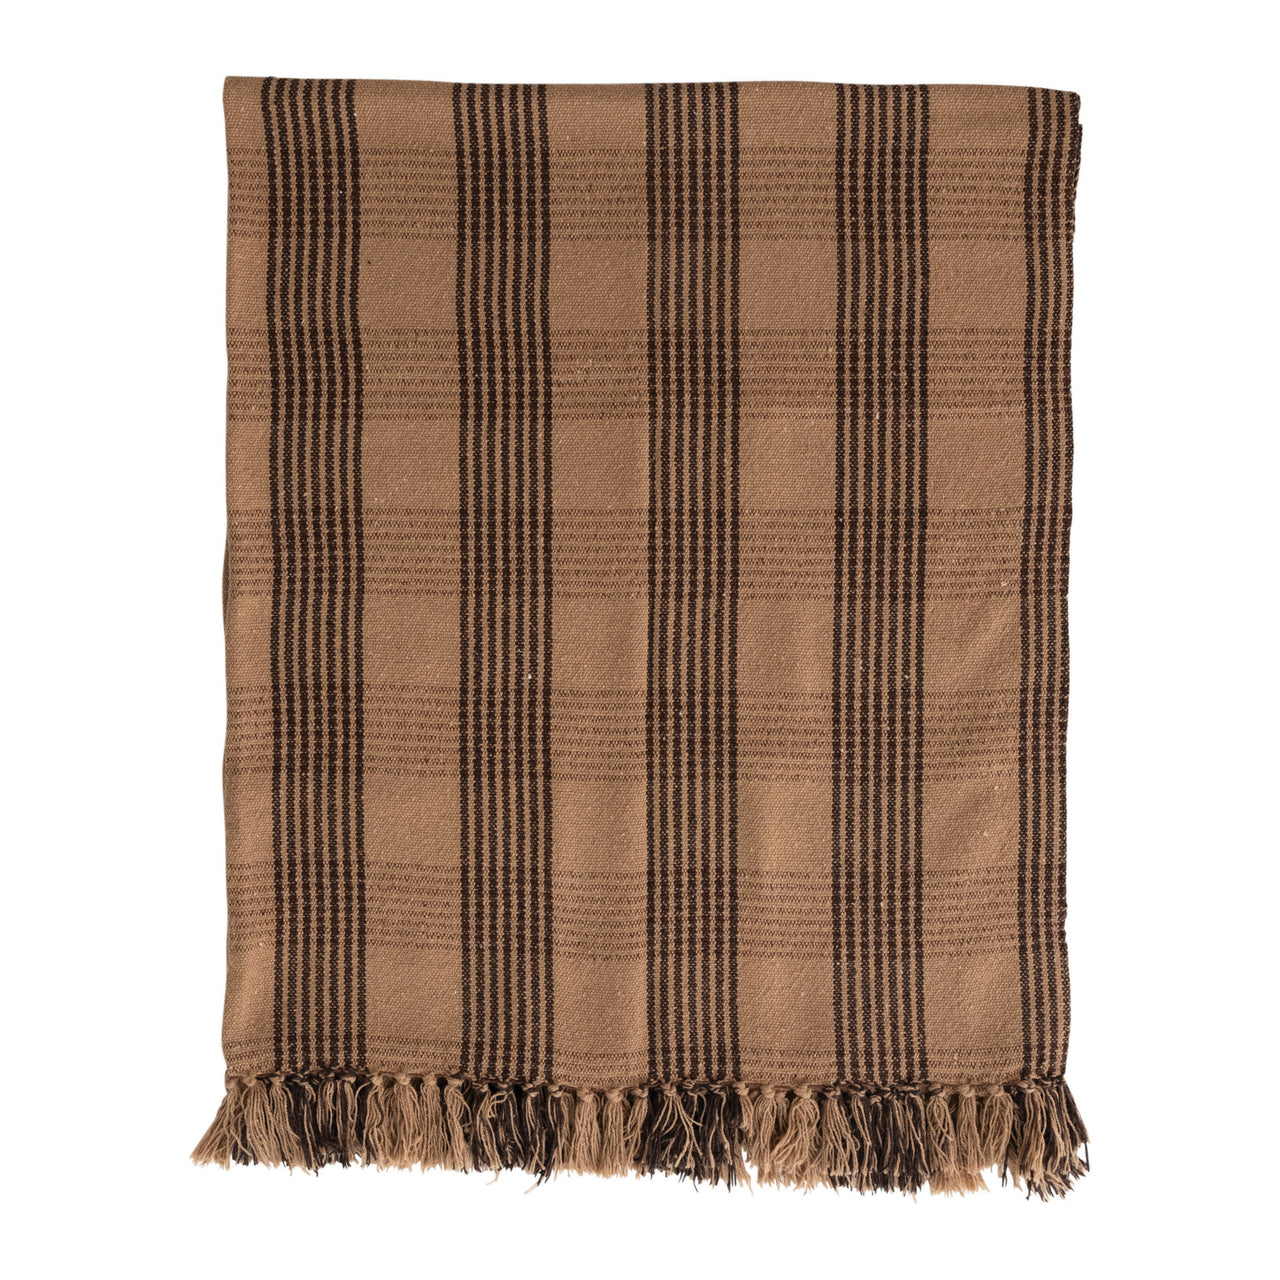 Woven Recycled Cotton Blend Plaid Throw with Fringe, Brown and Tan